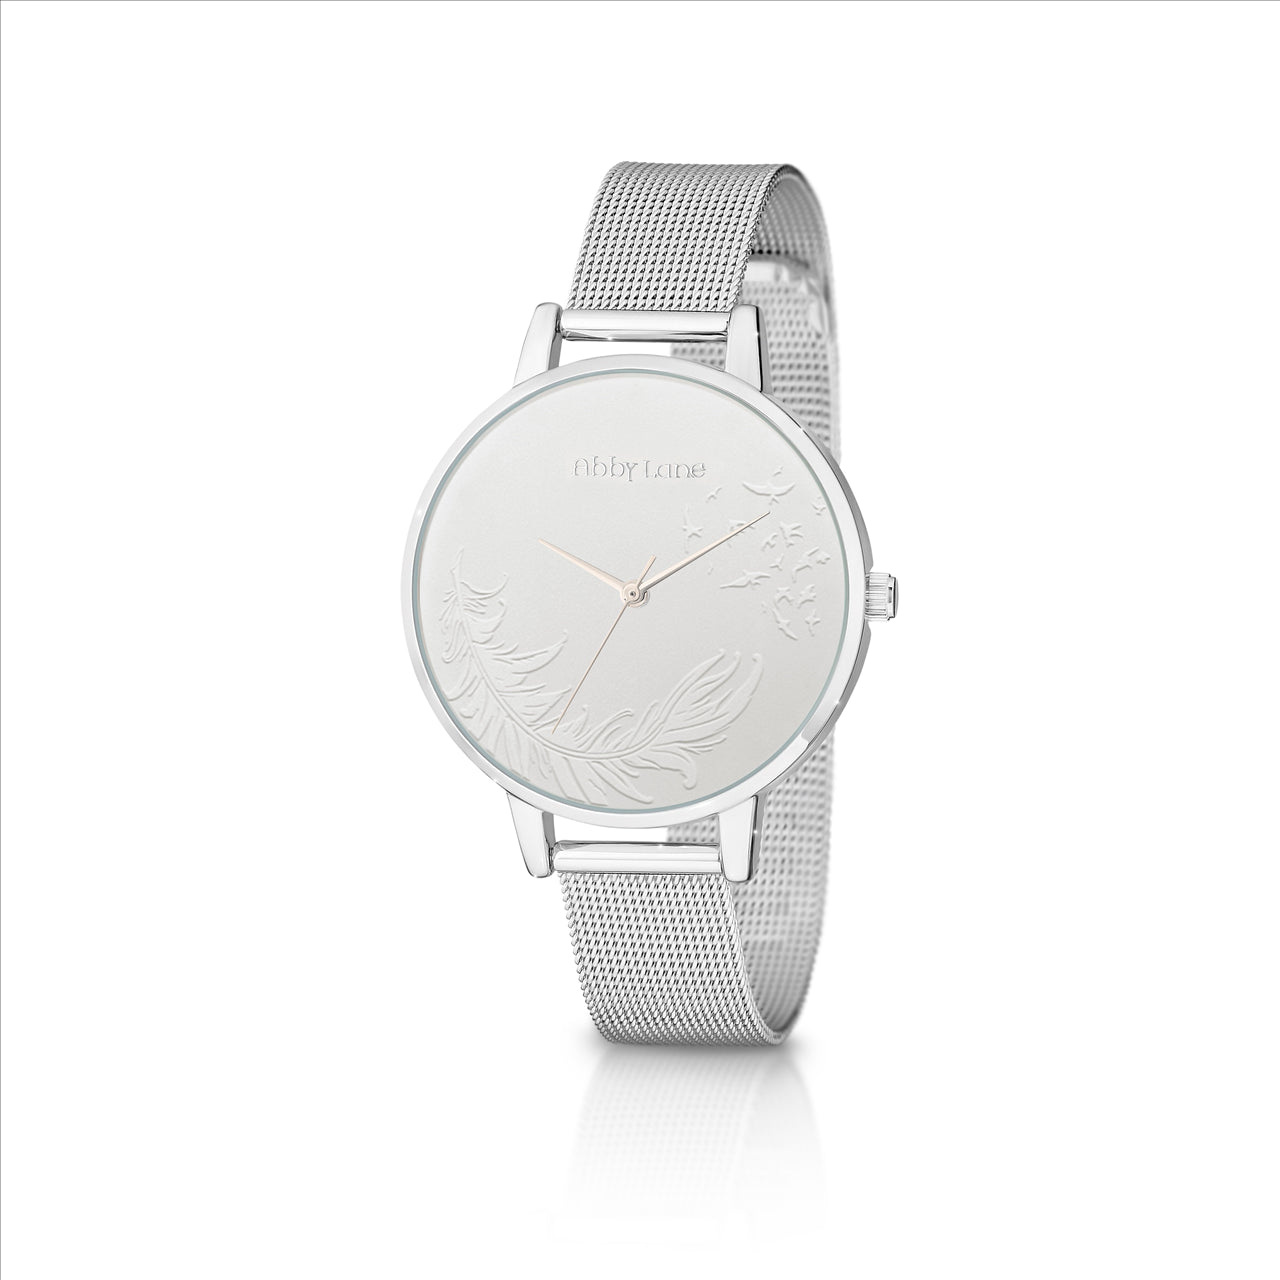 Abby lane emma silvertone case. white embossed dial with feather pattern. silvertone mesh bracelet. case size 38mm